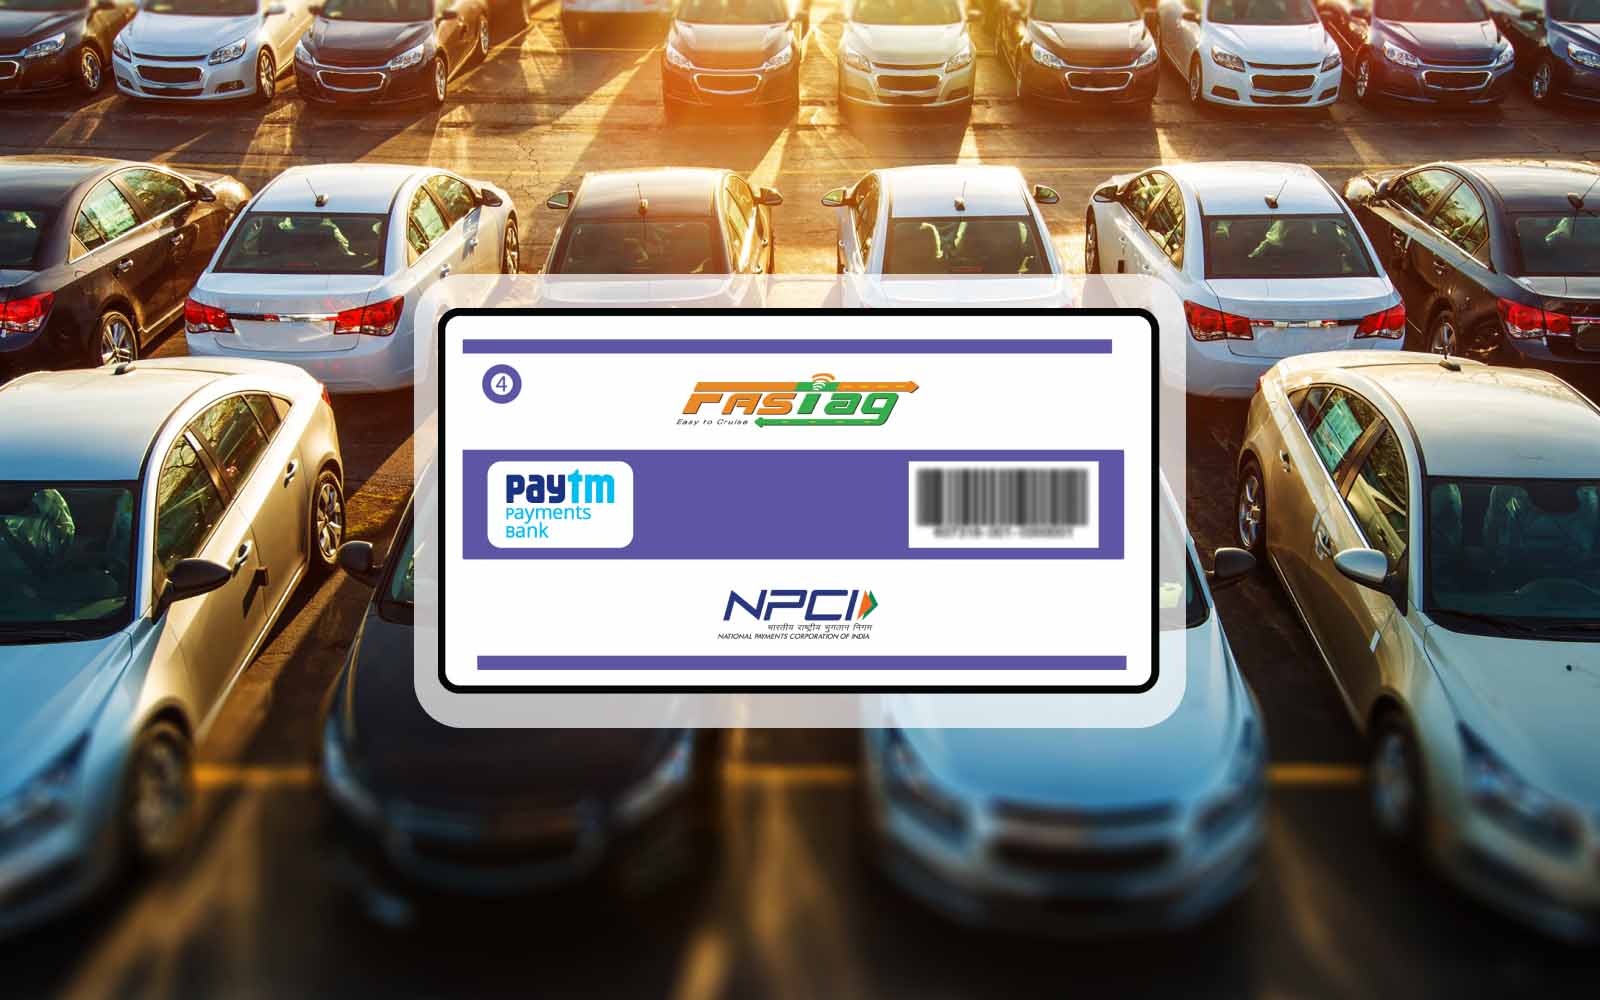 UPI Payments vs. FASTag – which is the better option for paying toll charges?